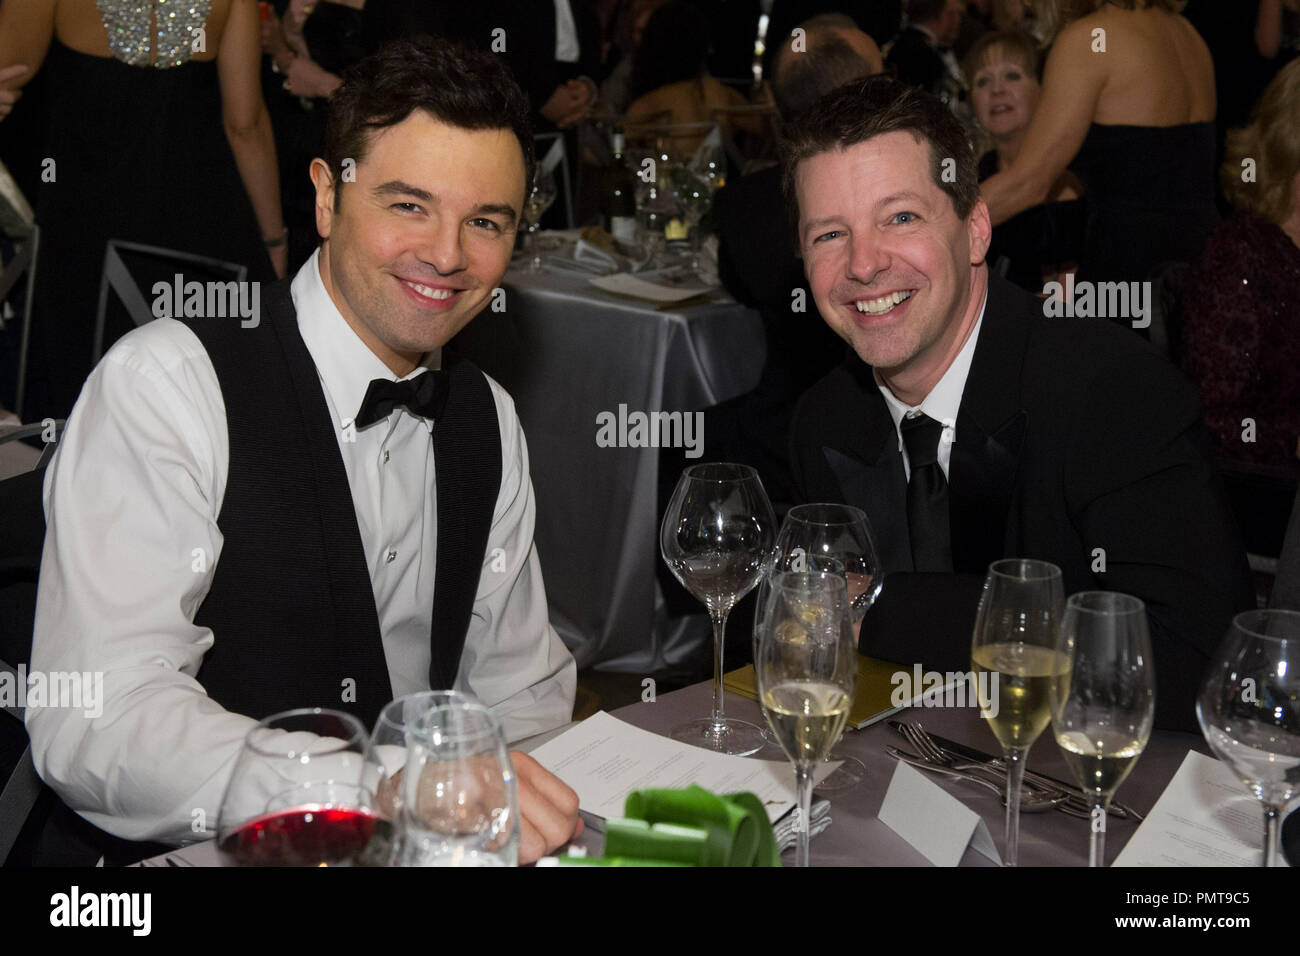 85th Academy Awards host Seth MacFarlane (left) and actor Sean Hayes attend the 2012 Governors Awards at The Ray Dolby Ballroom at Hollywood & Highland Center® in Hollywood, CA, Saturday, December 1.  File Reference # 31744 043  For Editorial Use Only -  All Rights Reserved Stock Photo